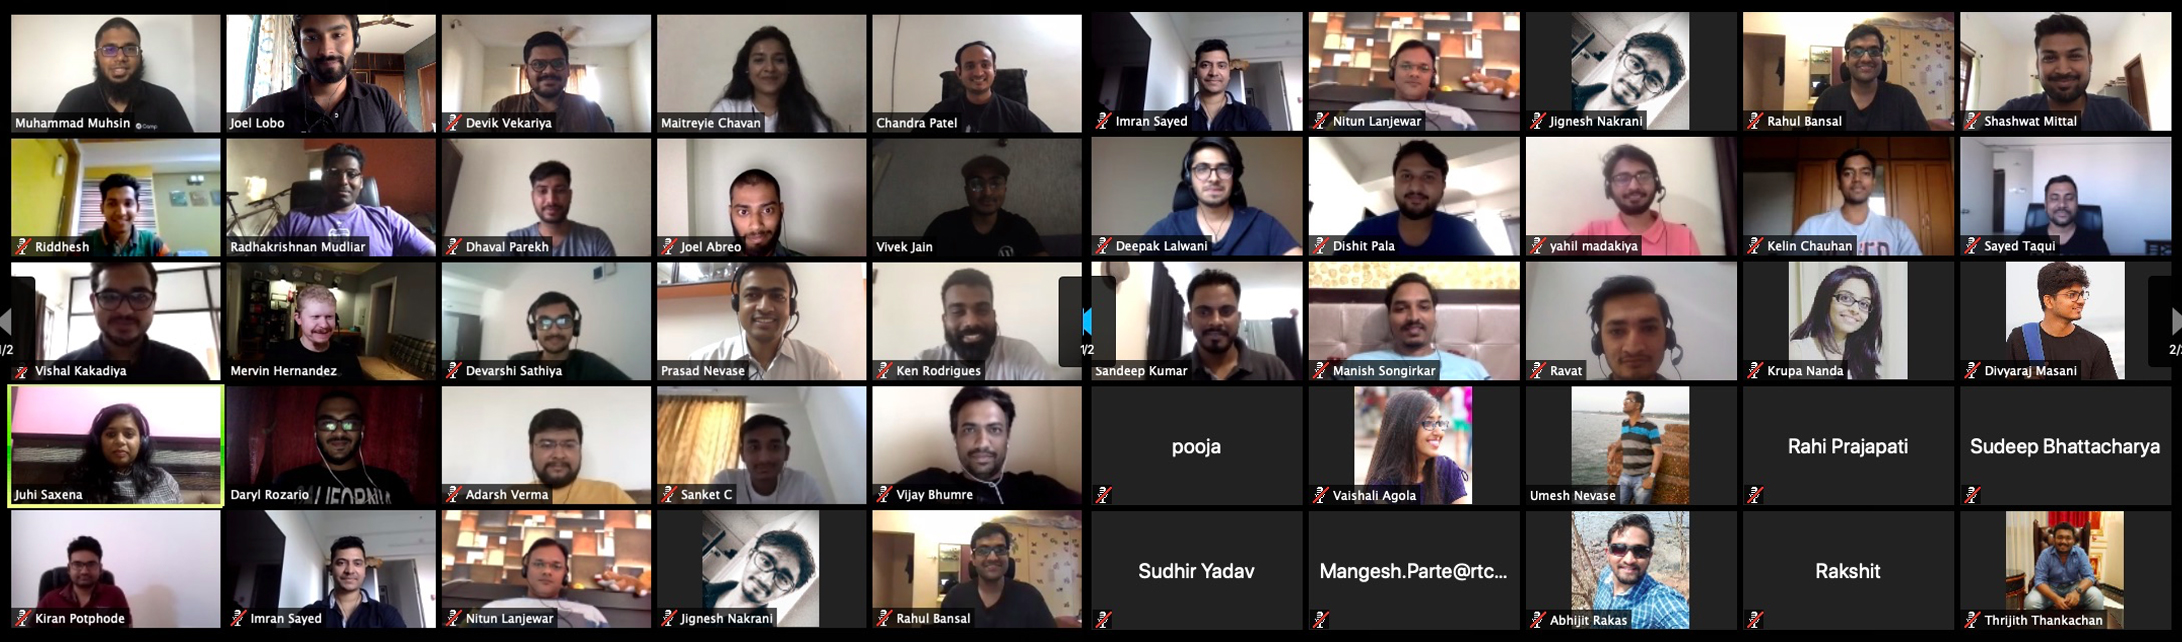 Combined screenshot of rtCamp celebrating their 11th anniversary over a 100% remote Zoom call.